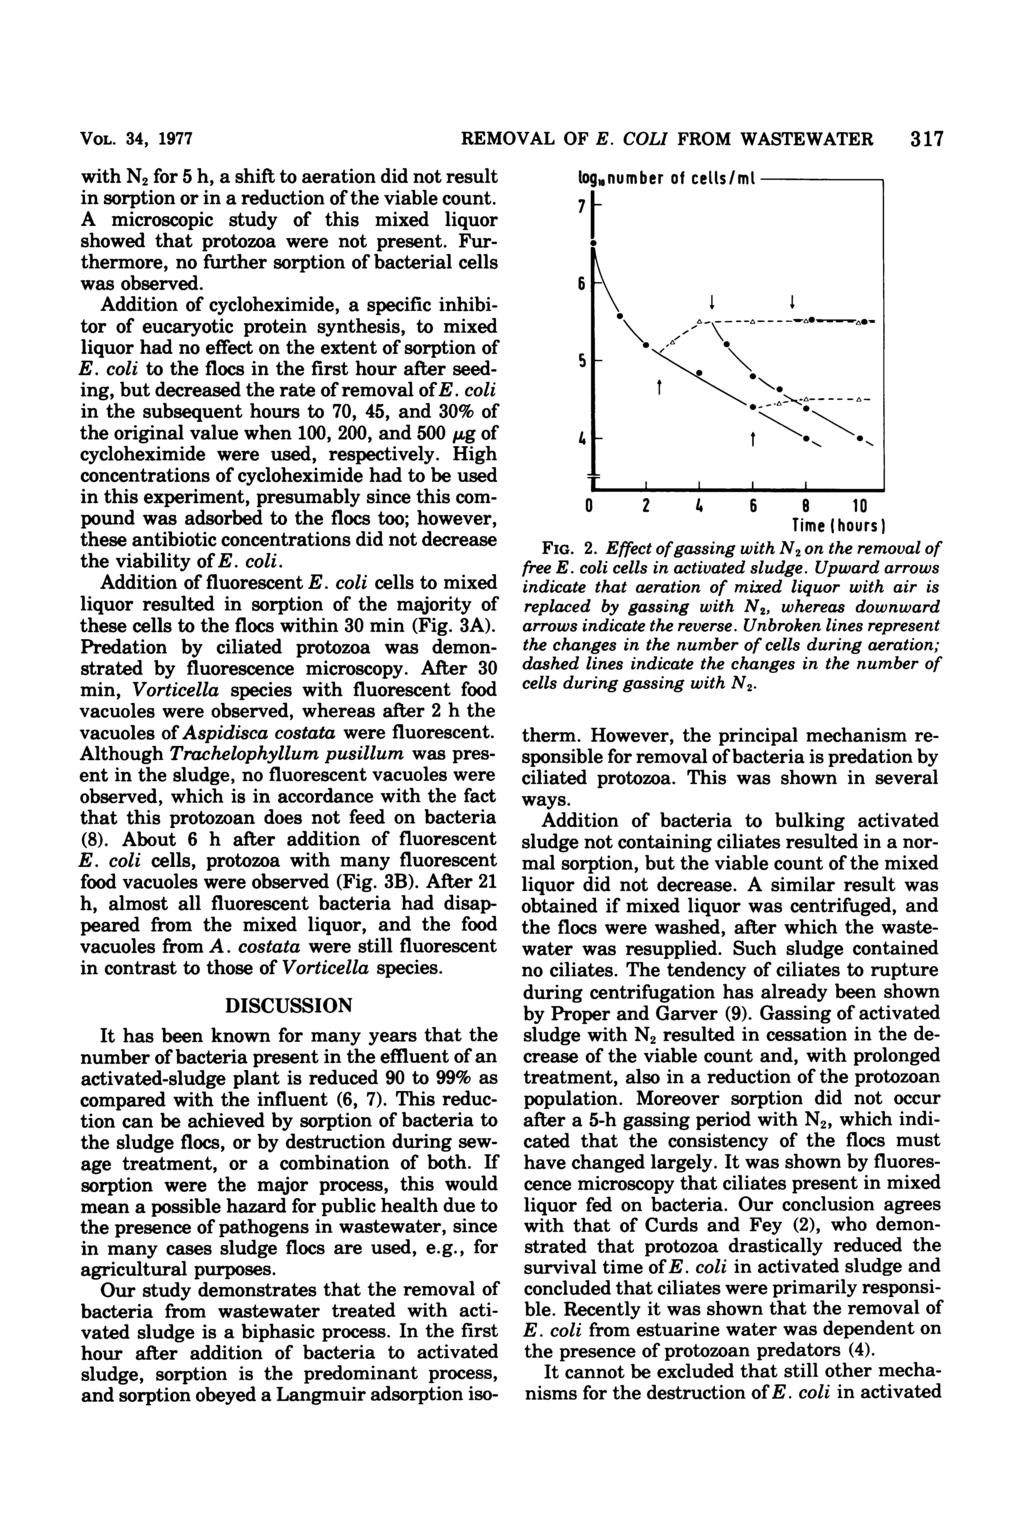 VOL. 34, 1977 with N2 for 5 h, a shift to aeration did not result in sorption or in a reduction of the viable count. A microscopic study of this mixed liquor showed that protozoa were not present.